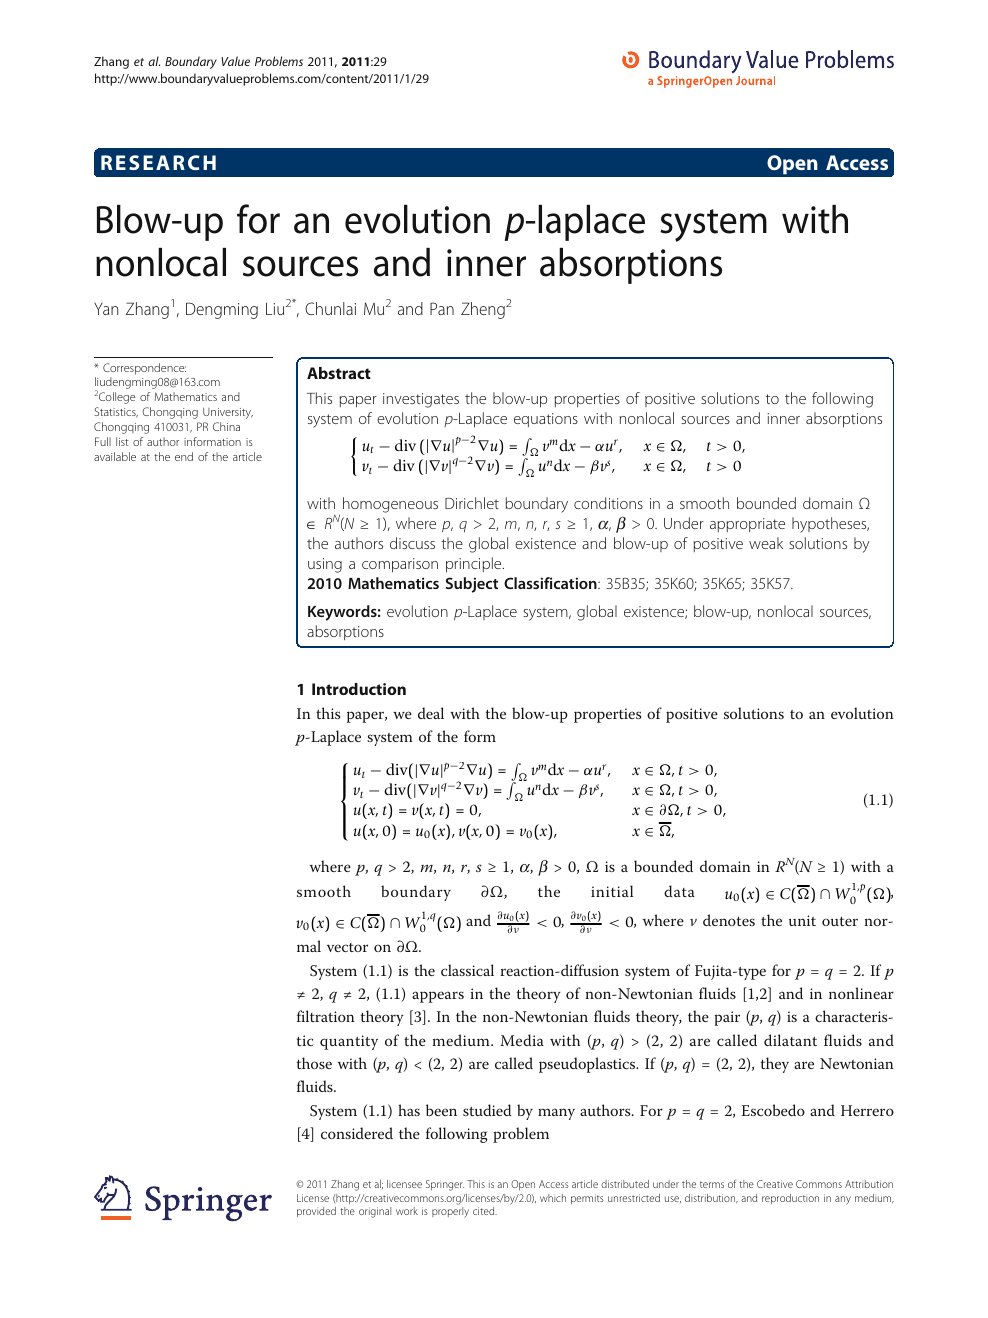 Blow Up For An Evolution P Laplace System With Nonlocal Sources And Inner Absorptions Topic Of Research Paper In Mathematics Download Scholarly Article Pdf And Read For Free On Cyberleninka Open Science Hub